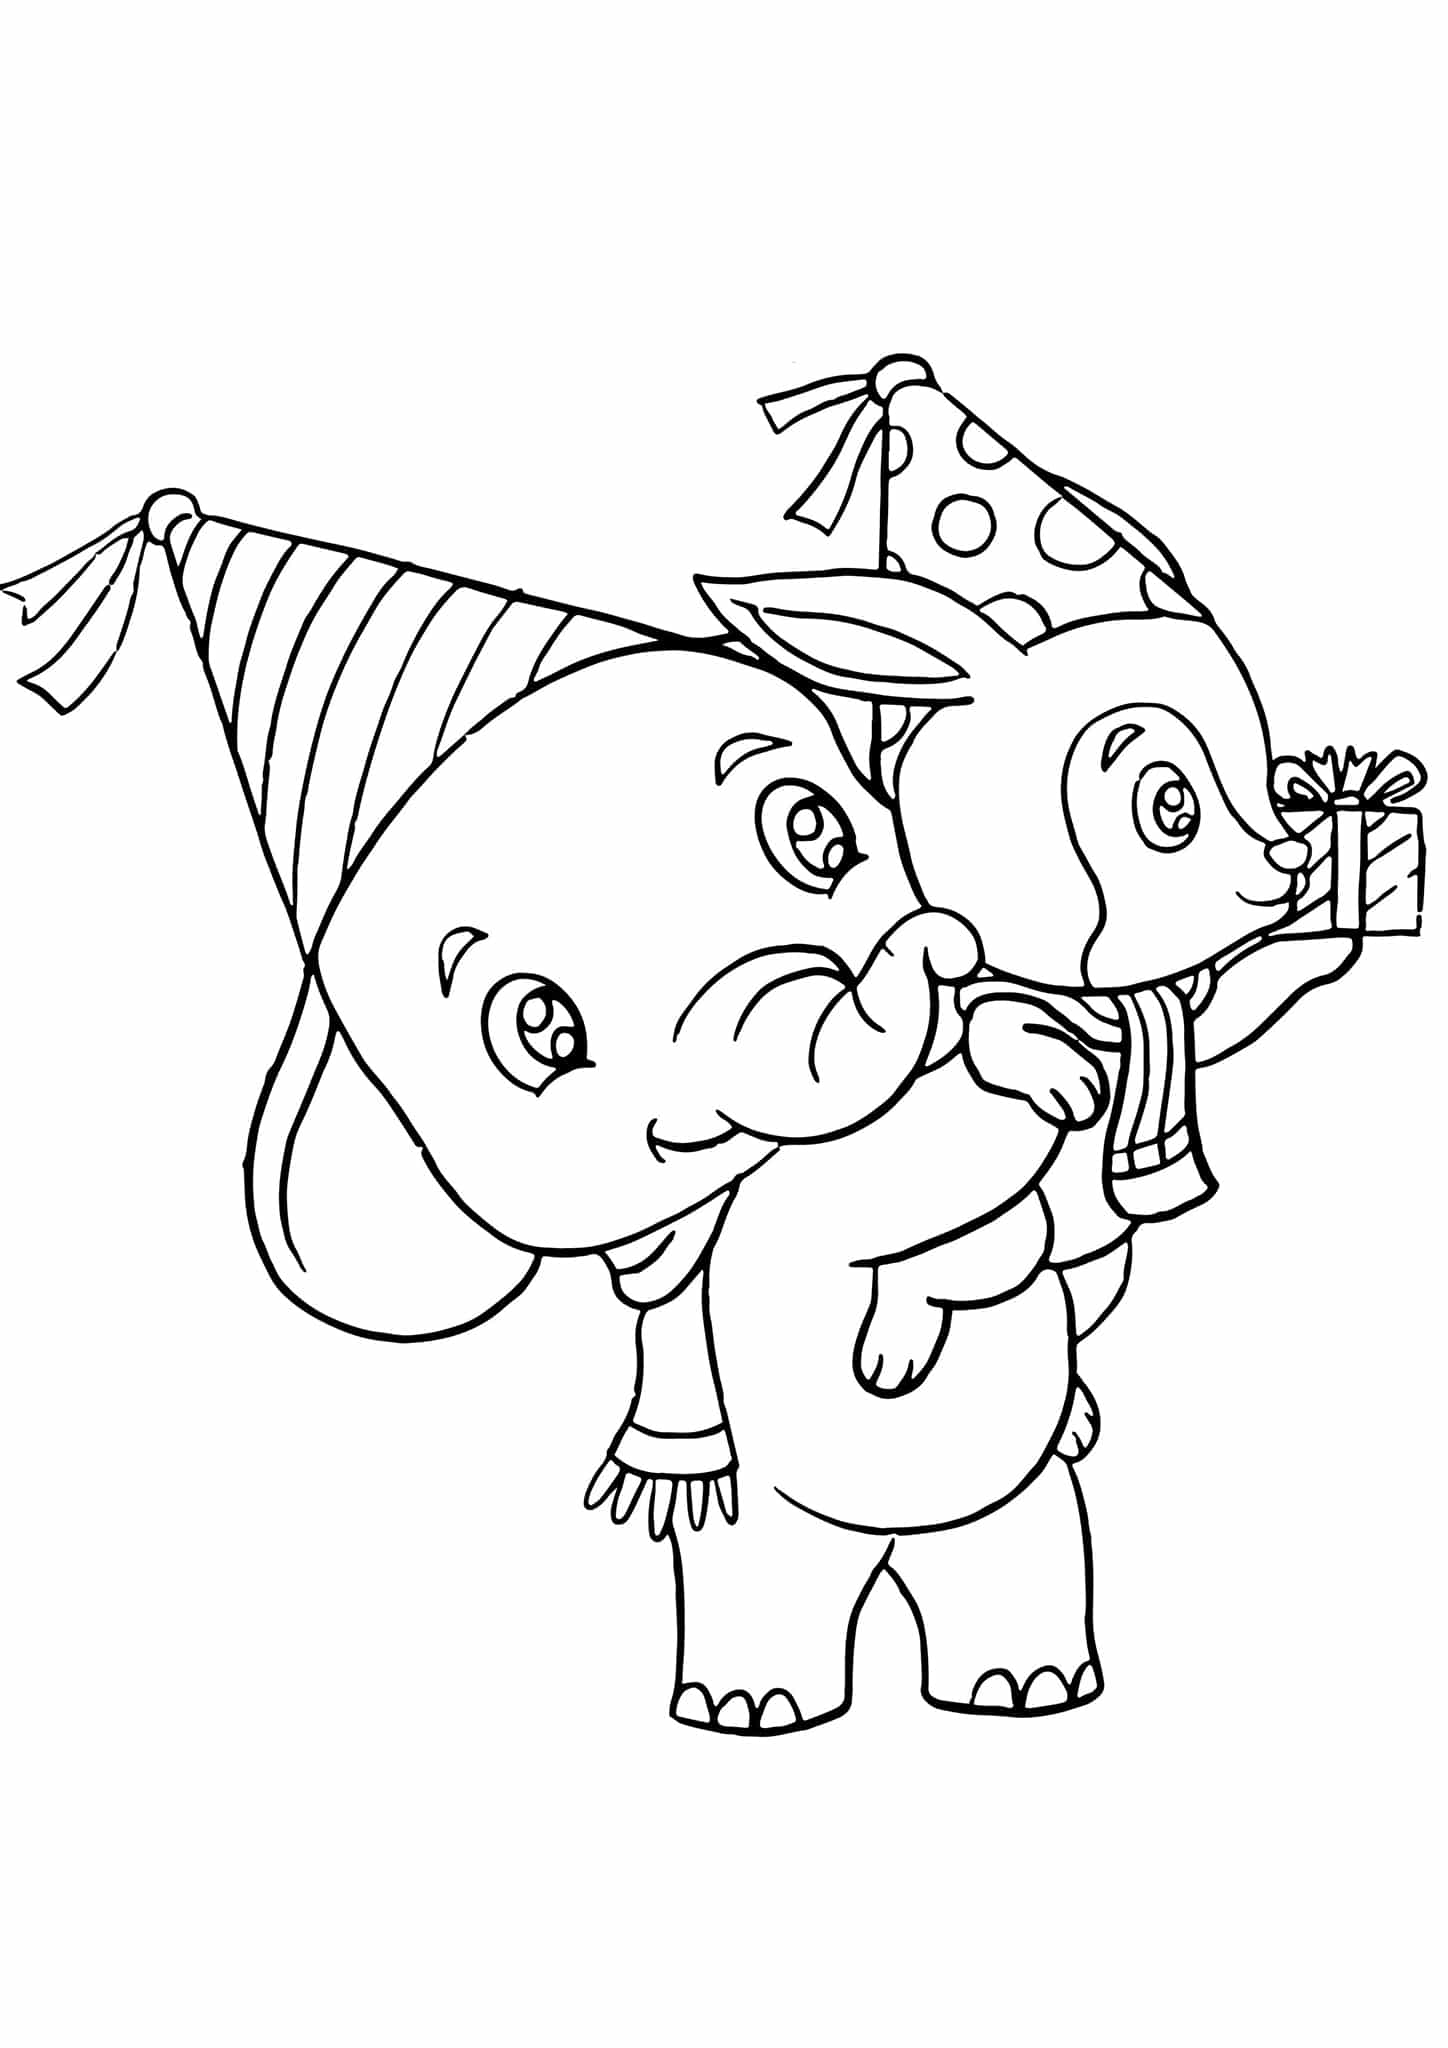 Download Free & Easy To Print Elephant Coloring Pages - Tulamama